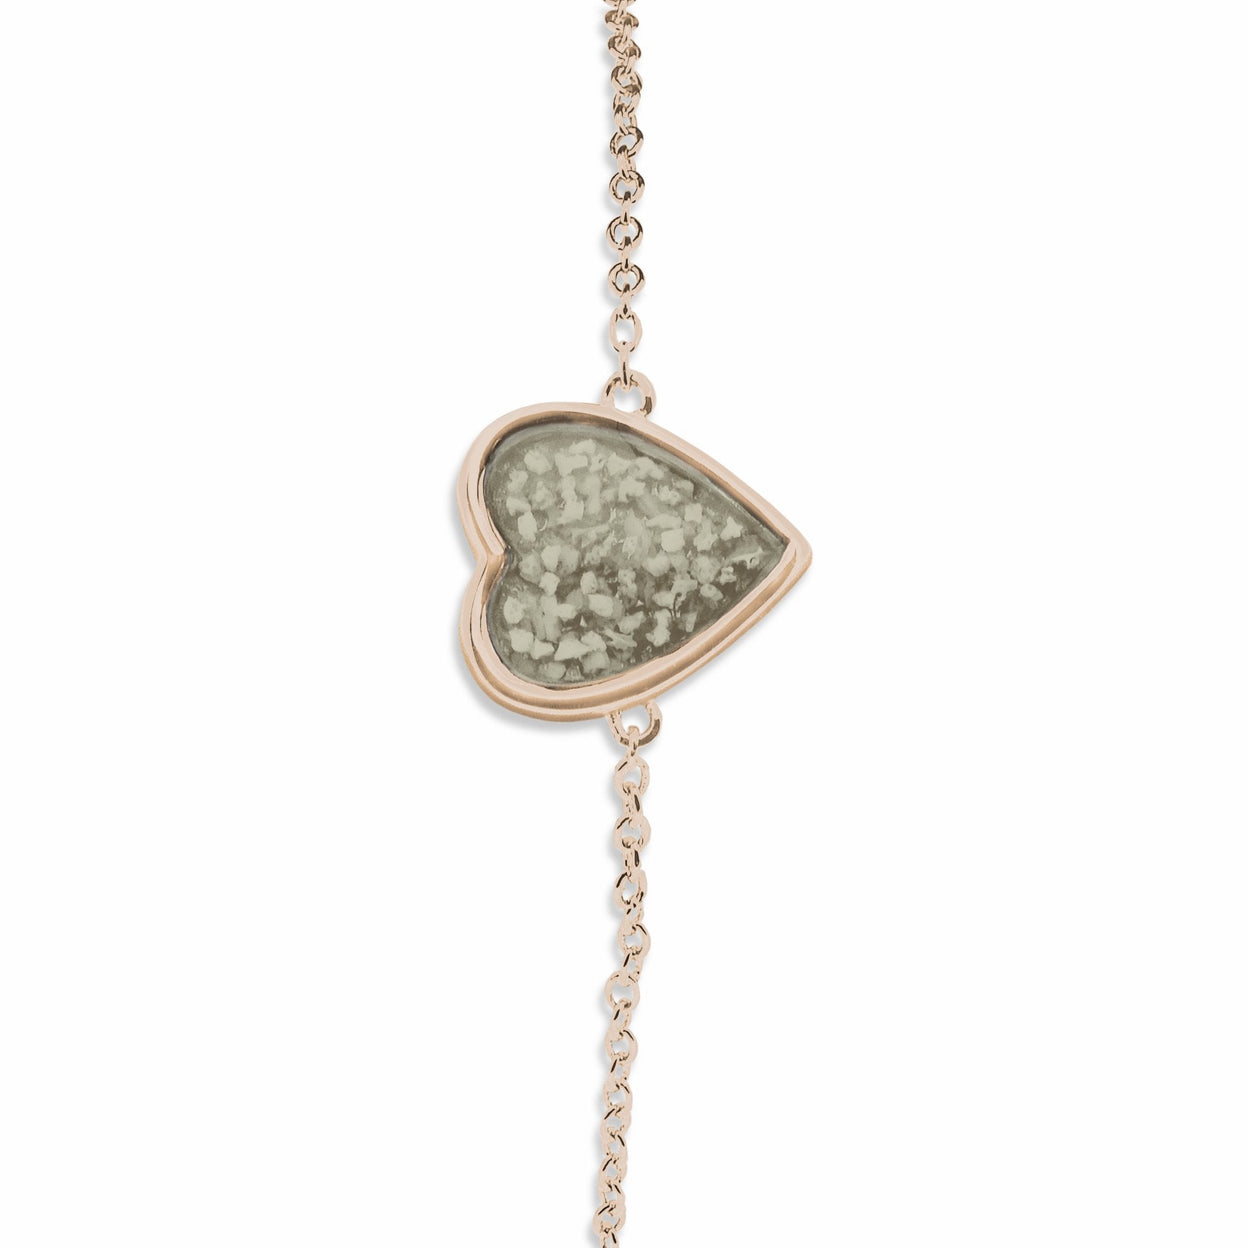 Load image into Gallery viewer, EverWith Ladies Heart Memorial Ashes Bracelet - EverWith Memorial Jewellery - Trade